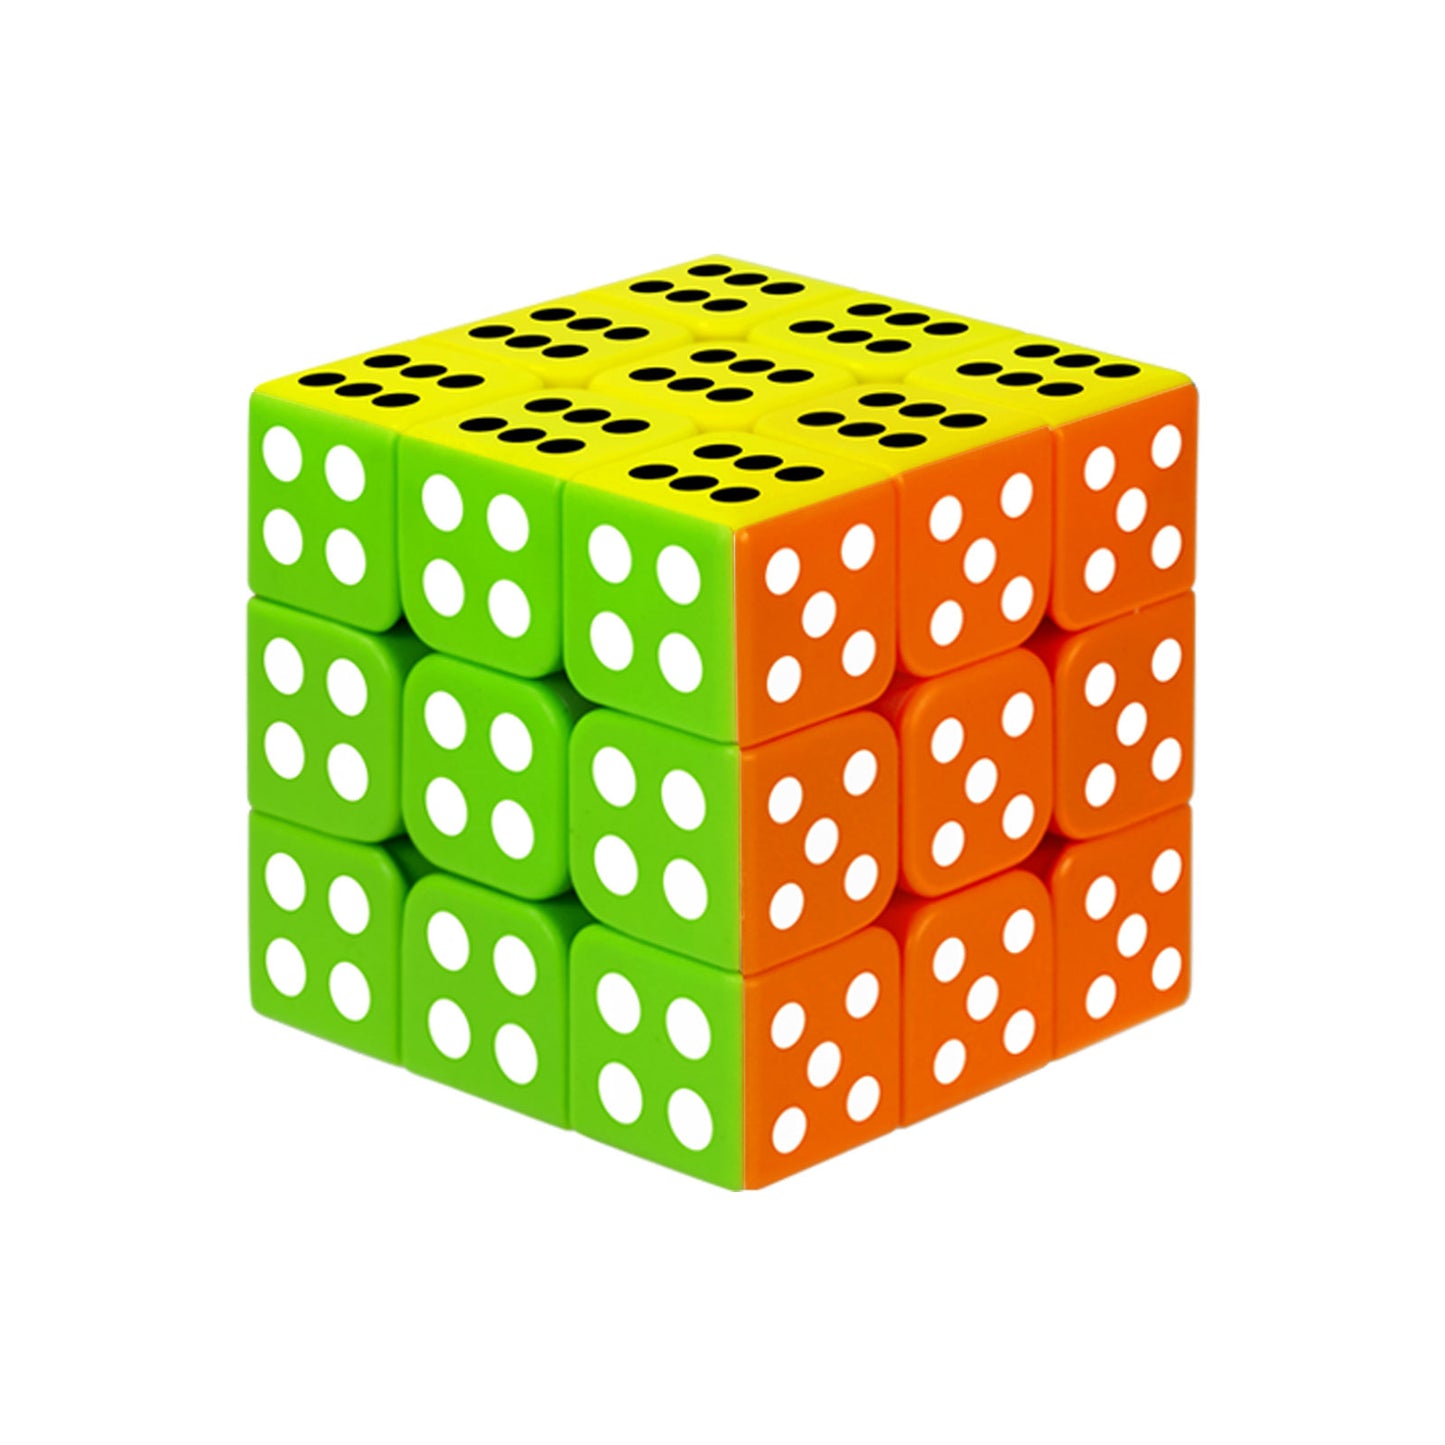 3x3 Speed Cube, Surface Magic Cube, Original Sticker Magic Cube, A Funny Puzzle Game and a Brain Teasers